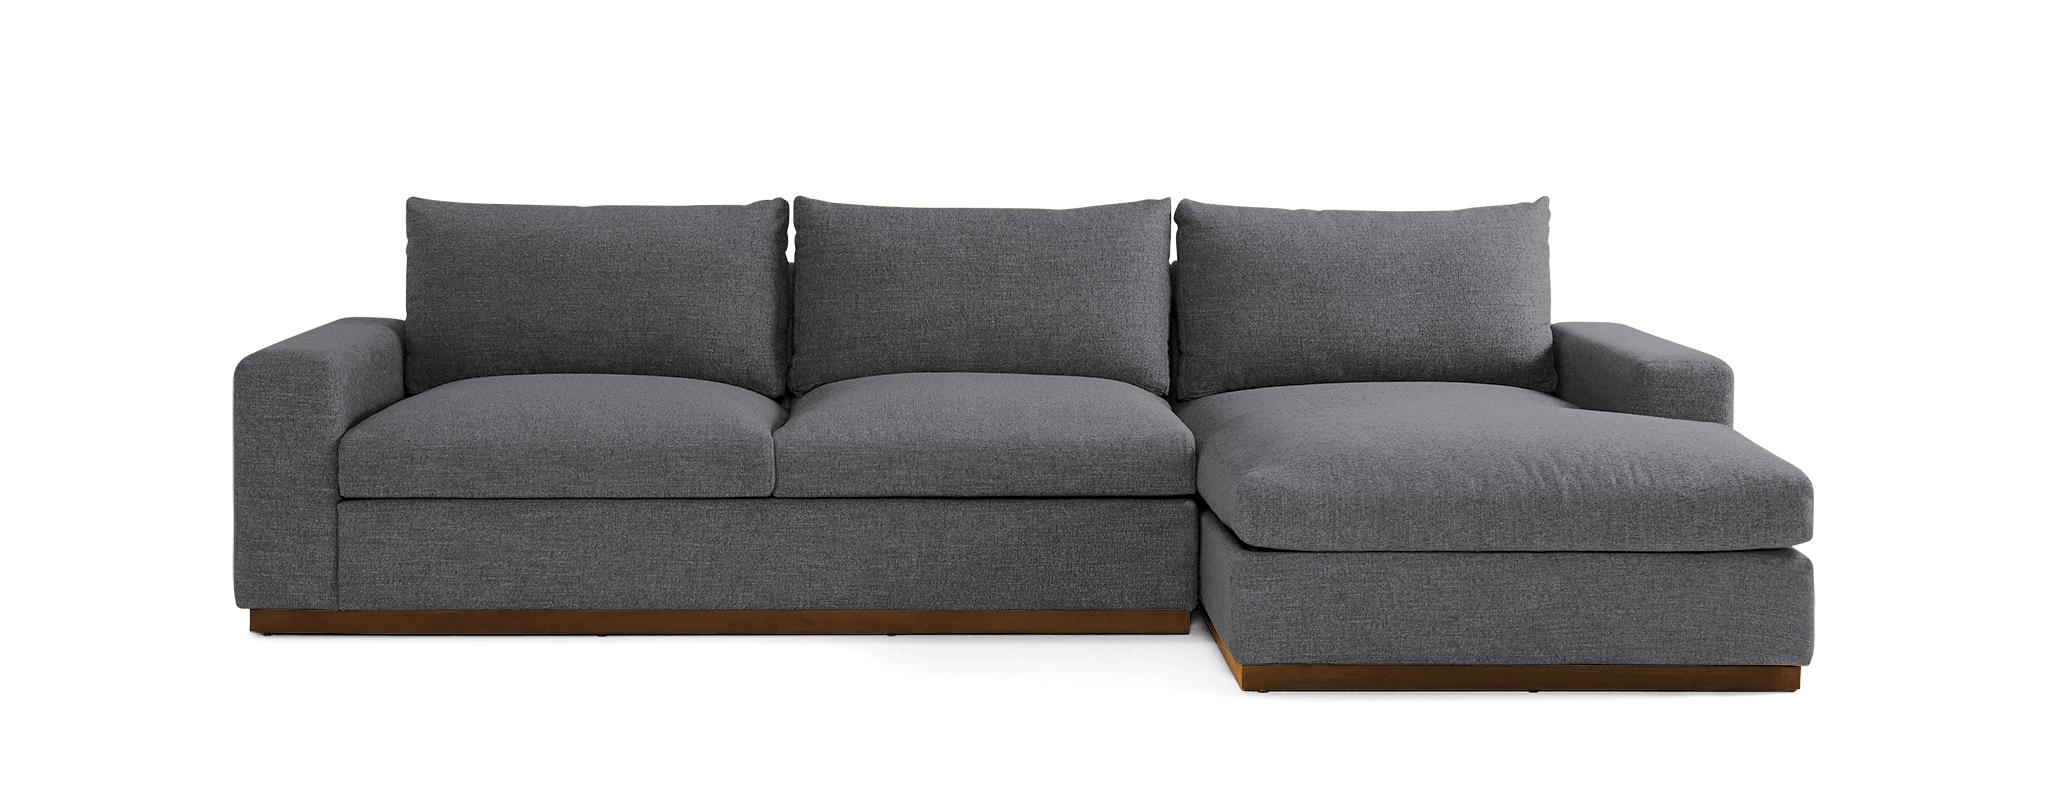 Gray Holt Mid Century Modern Sectional with Storage - Essence Ash - Mocha - Right - Image 0